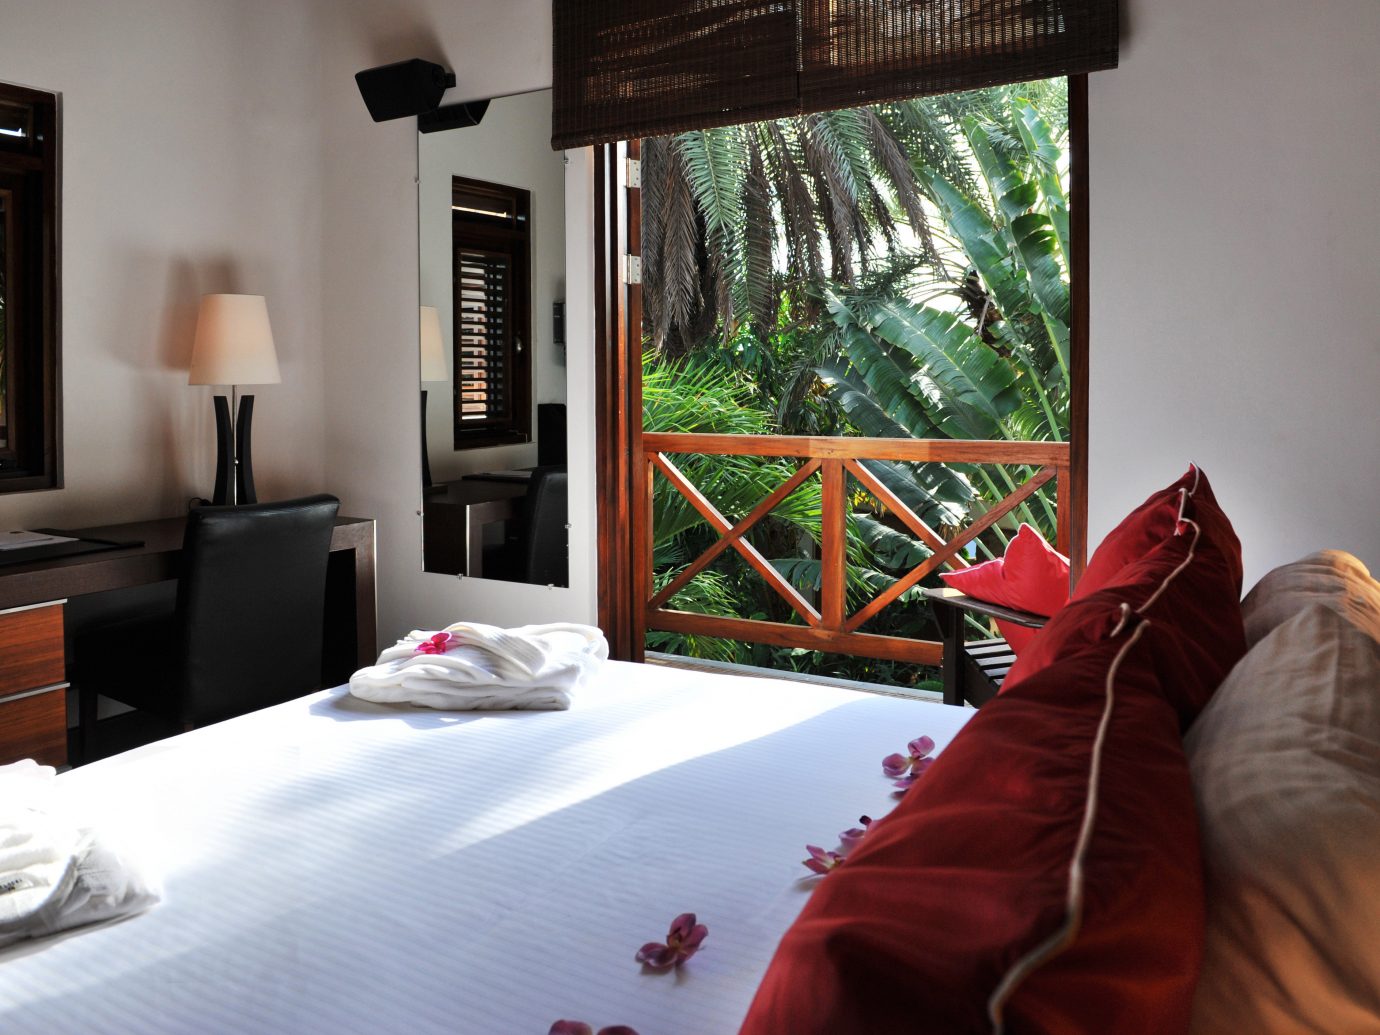 Bedroom Boutique Hotels Hip Hotels Lounge Luxury Modern Romantic Getaways Romantic Hotels Scenic views Suite Tropical indoor wall room property bed house home living room interior design cottage estate real estate Villa